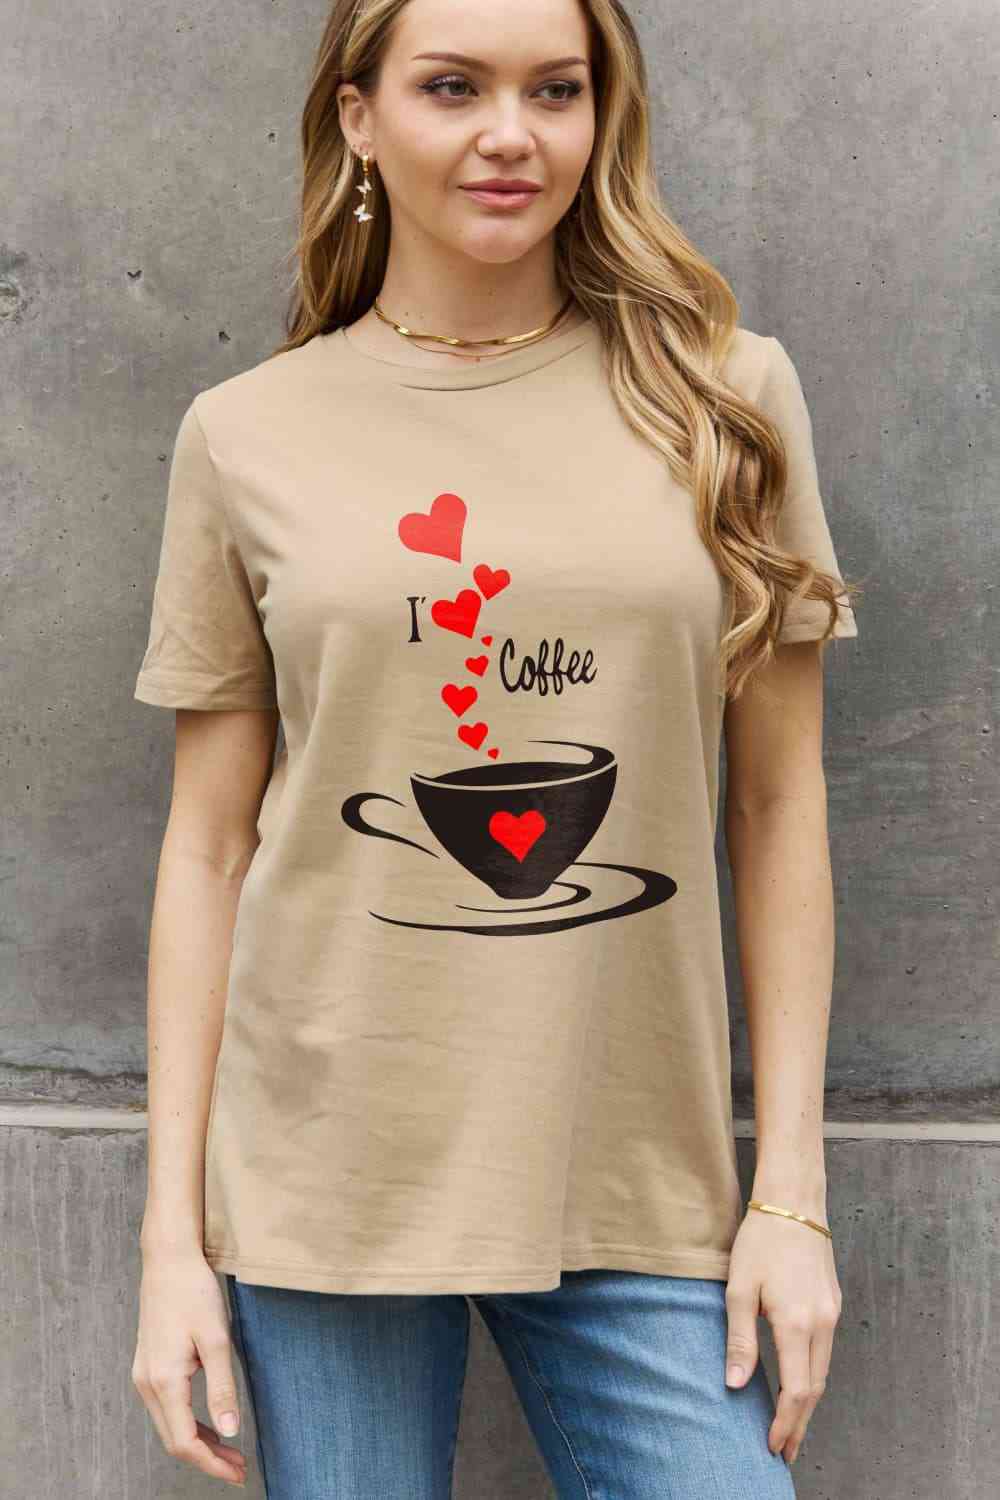 Simply Love Full Size I LOVE COFFEE Graphic Cotton Tee - TRENDMELO